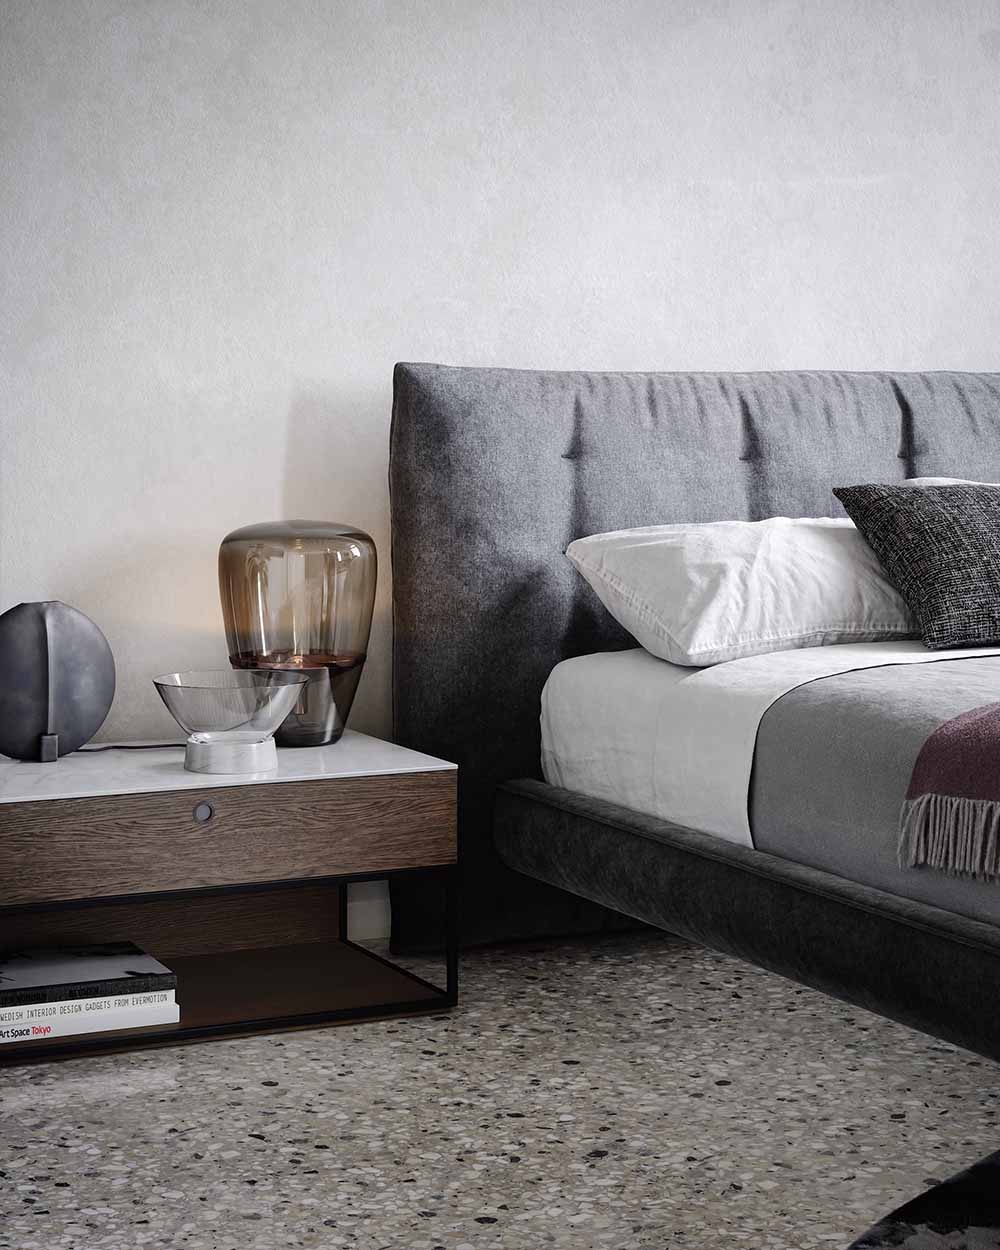 Square luxury Italian bedside table and drawer unit by Novamobili. Sold by Krieder UK.